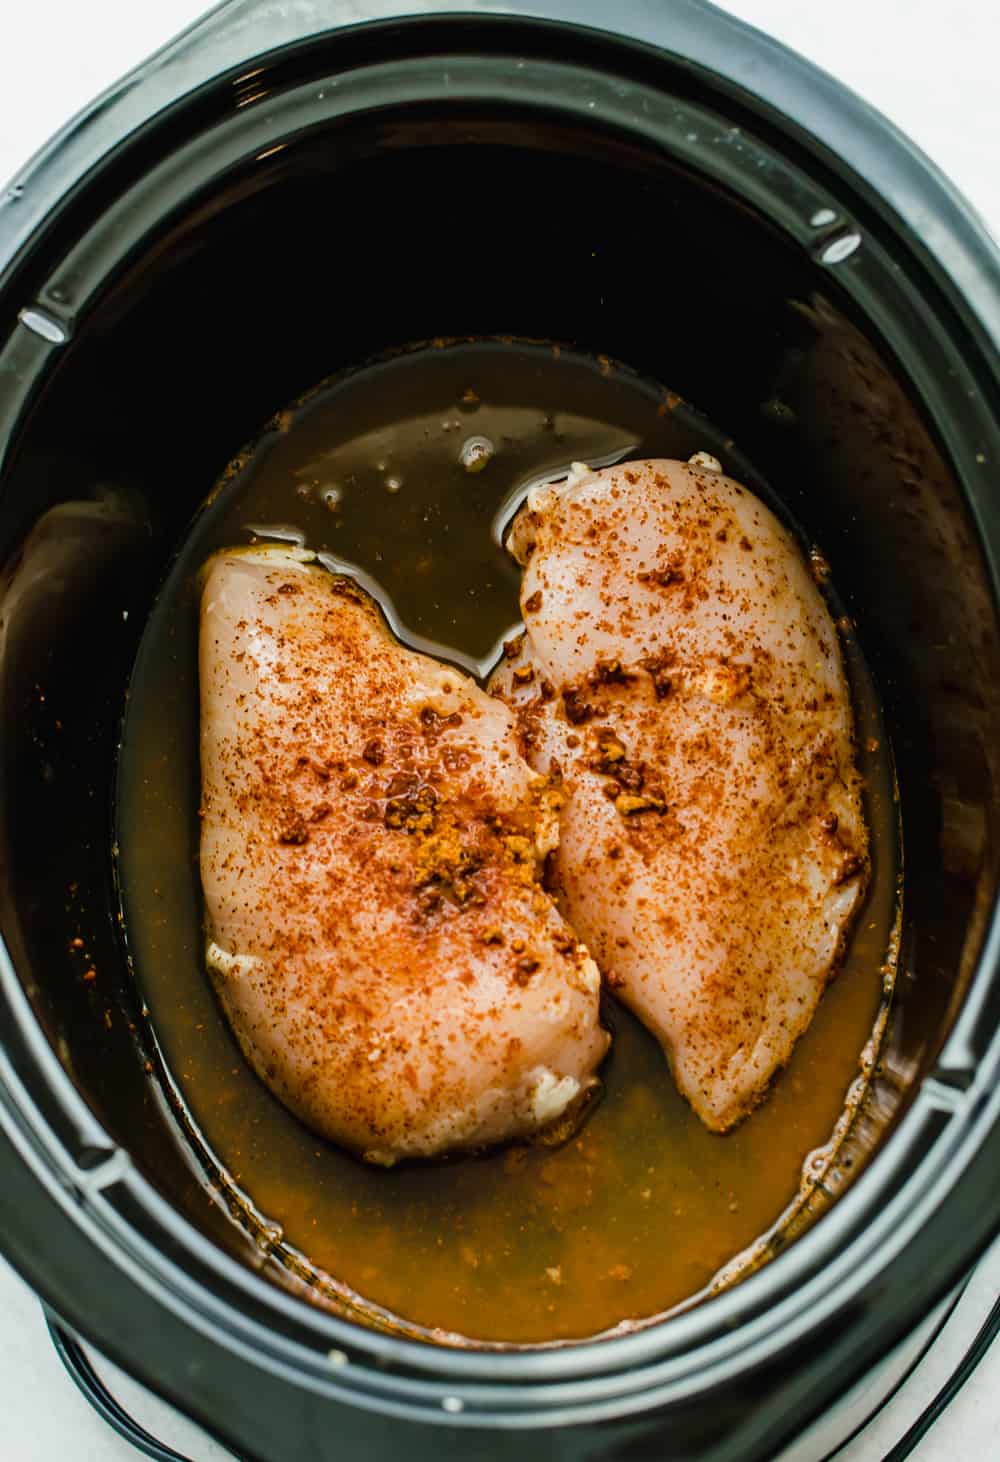 Two raw chicken breasts seasoned with taco seasoning in the crock pot.